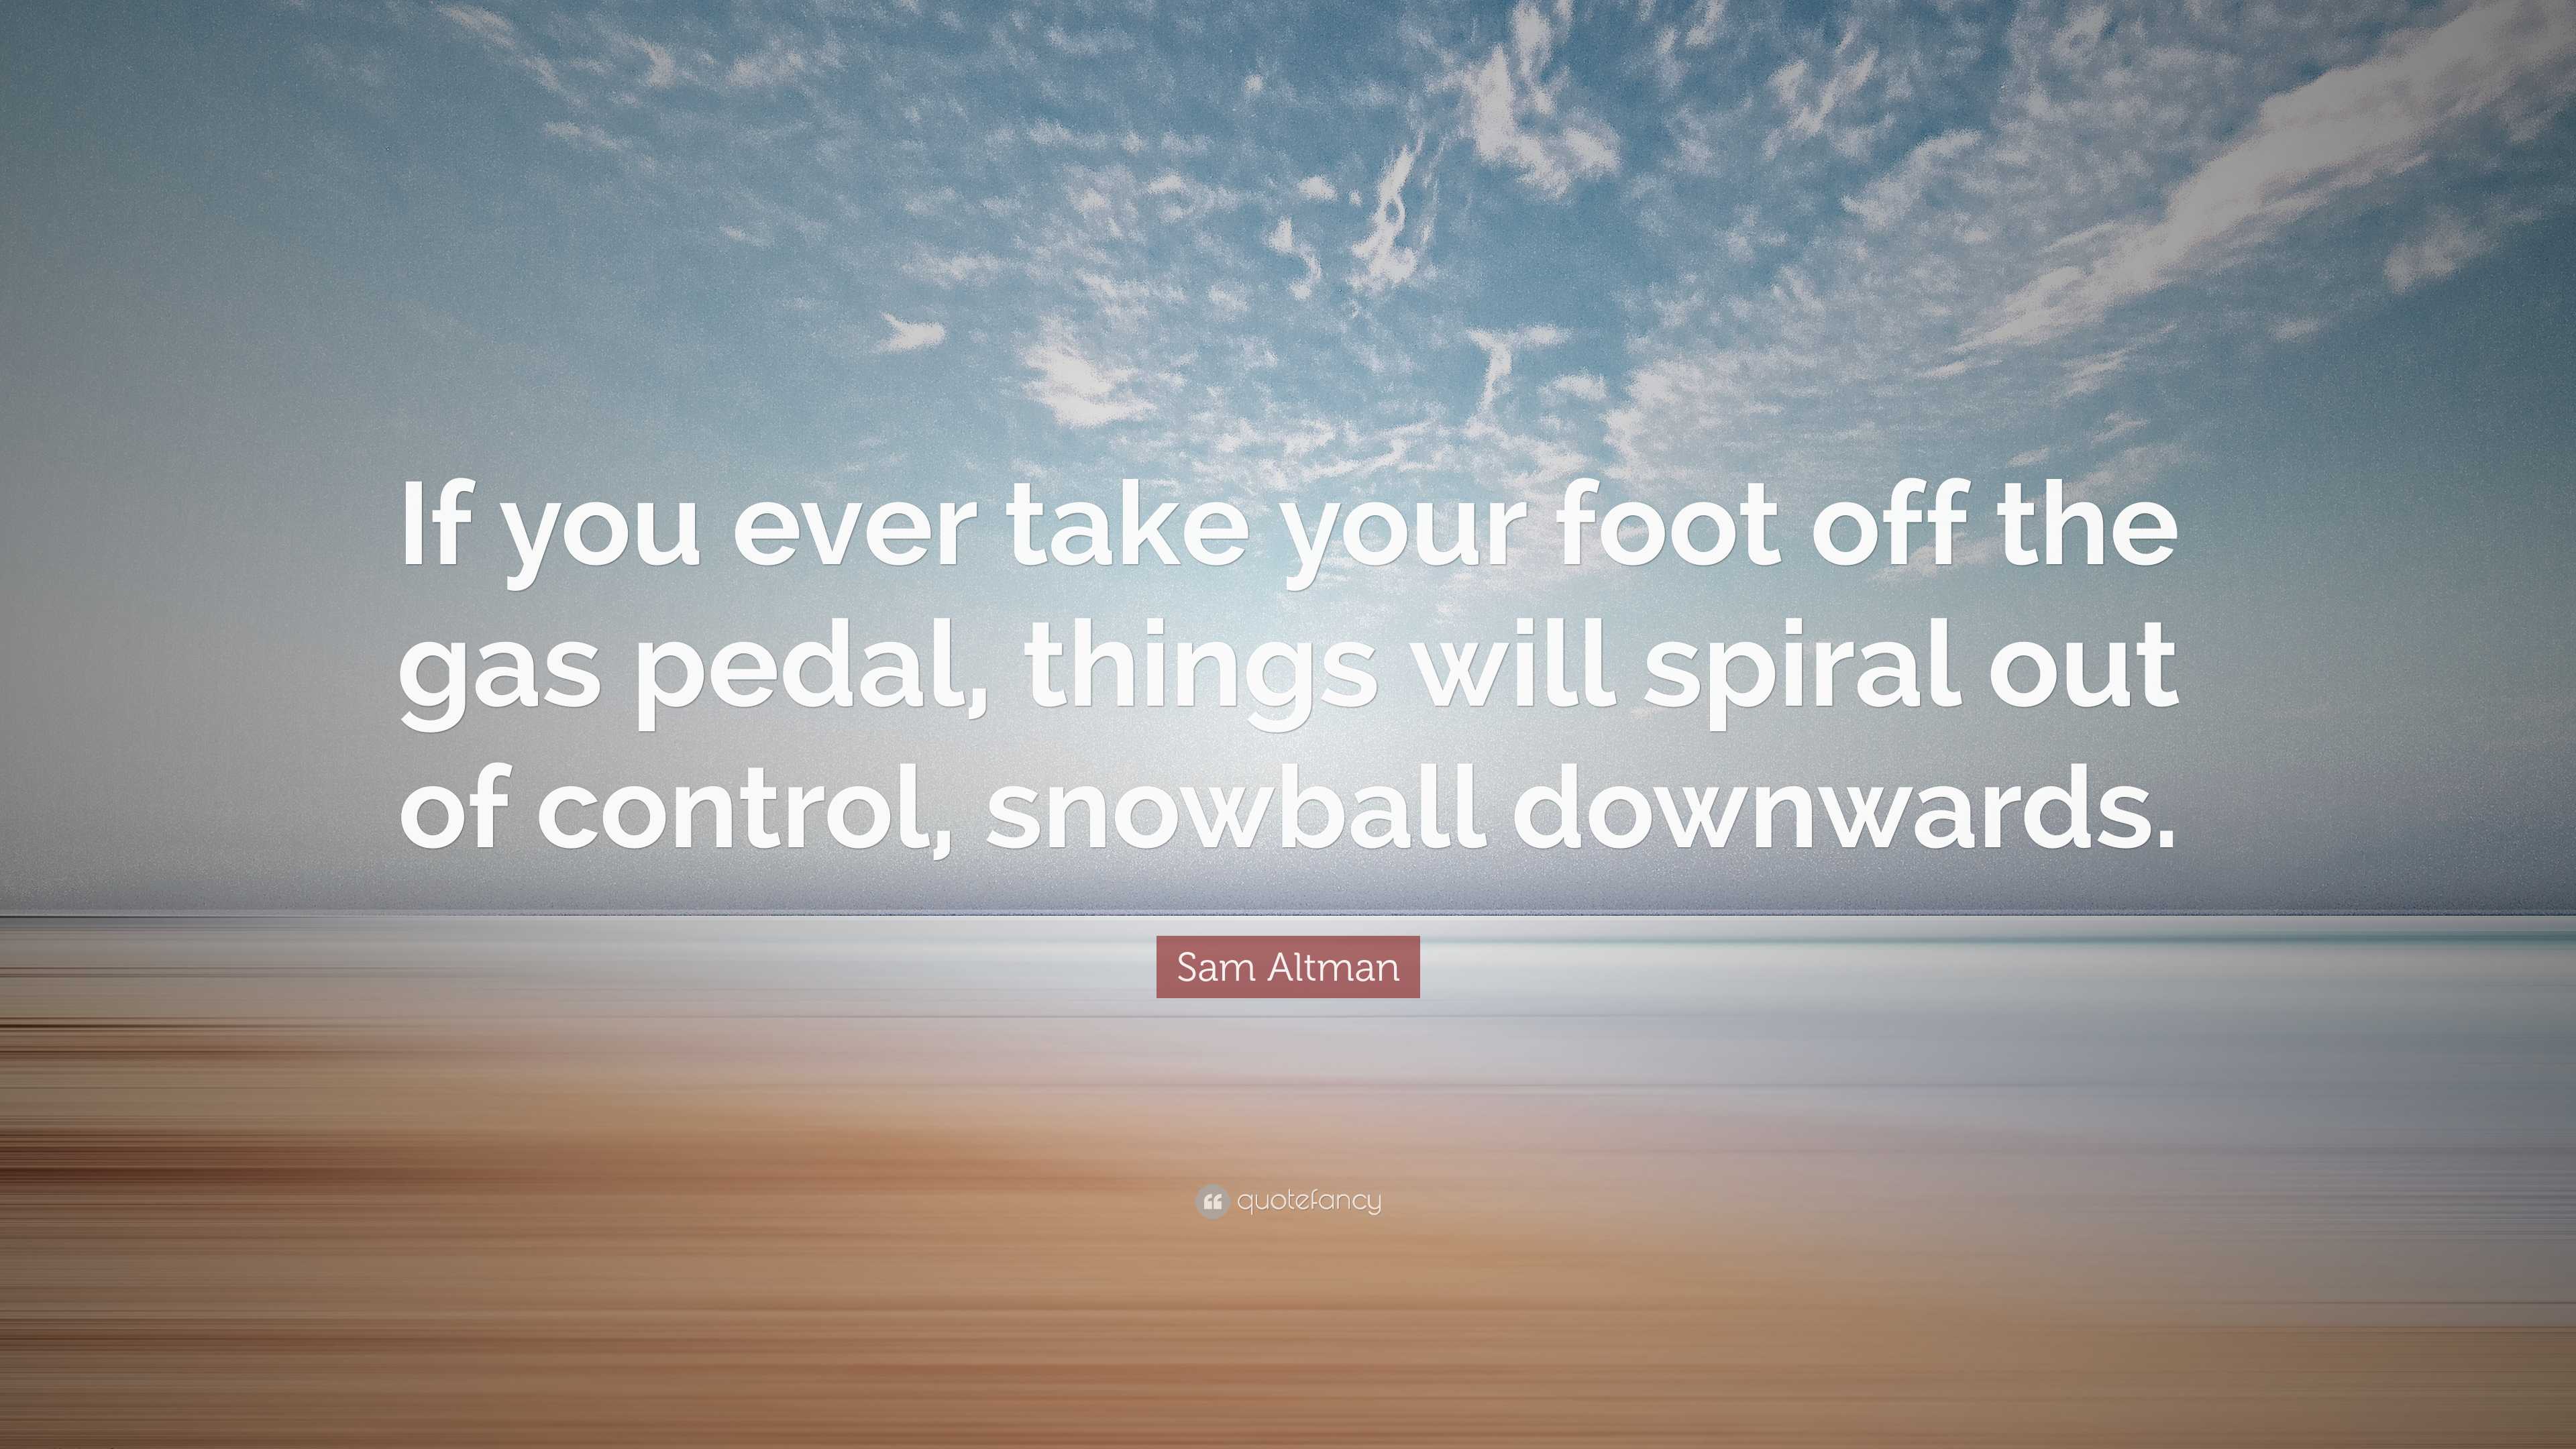 Sam Altman Quote: “If you ever take your foot off the gas pedal, things  will spiral